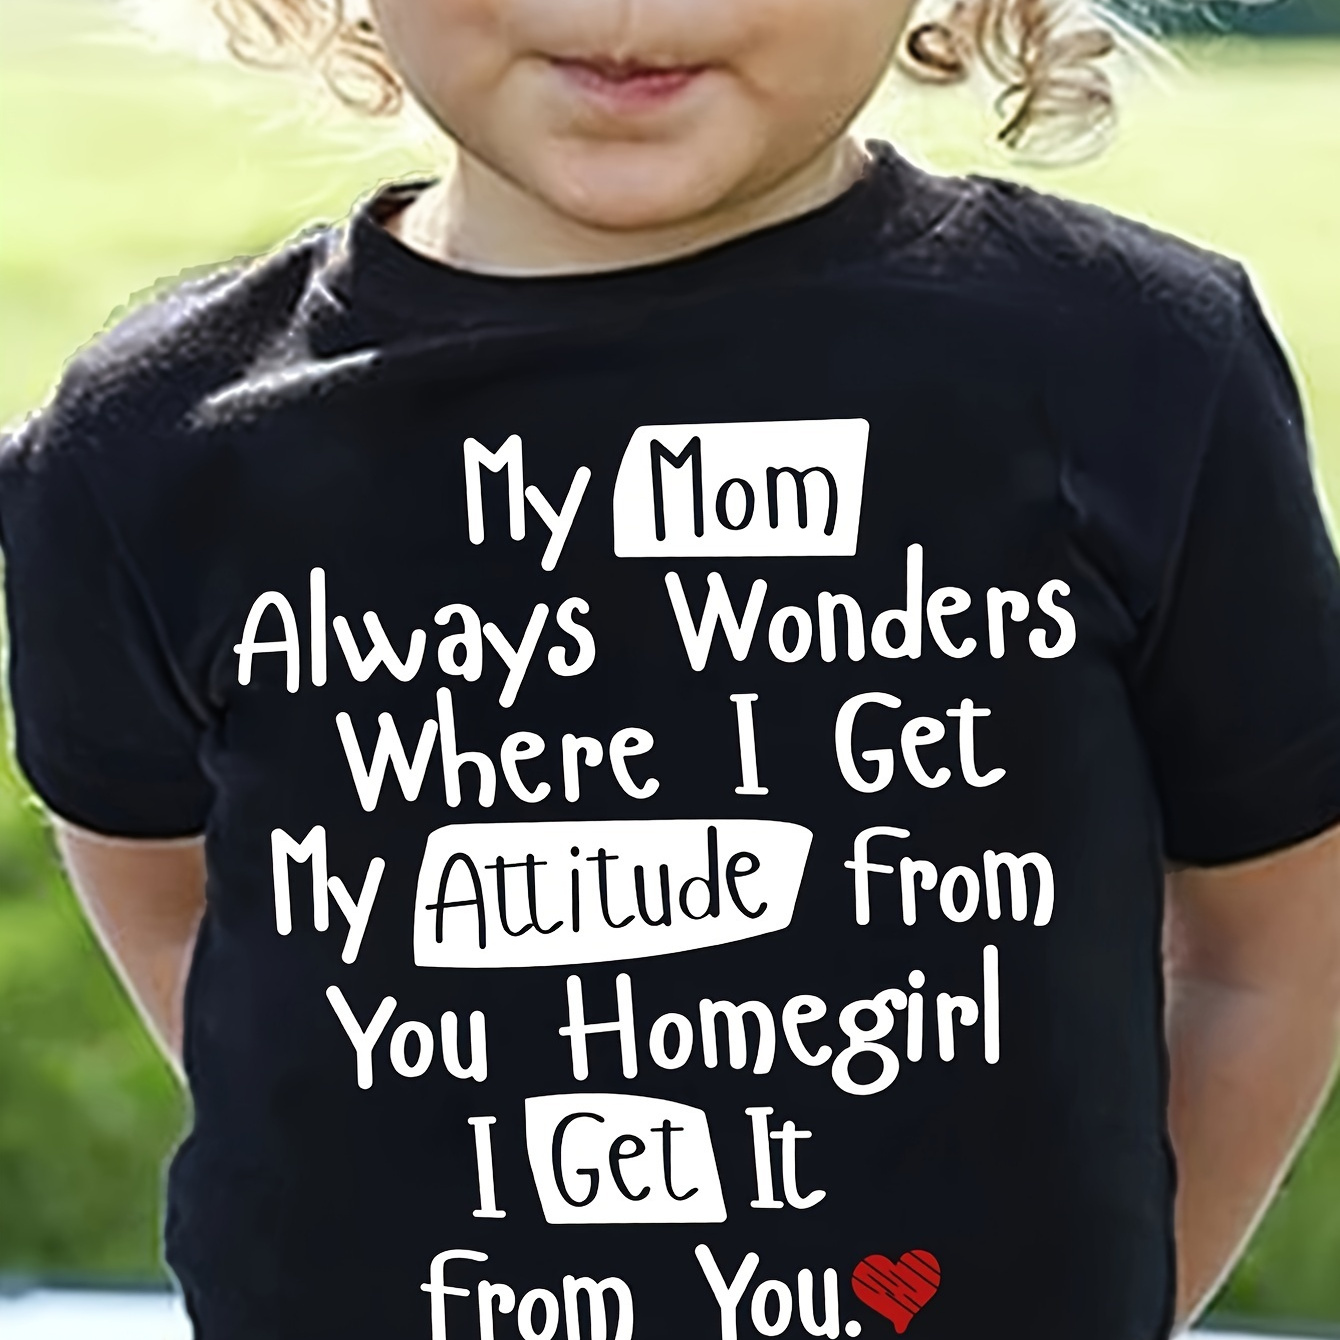 

My Mom Always Wonders Where I Get My Attitude From Print, Girls' Casual Crew Neck Short Sleeve T-shirt, Comfy Top Clothes For Spring And Summer For Outdoor Activities